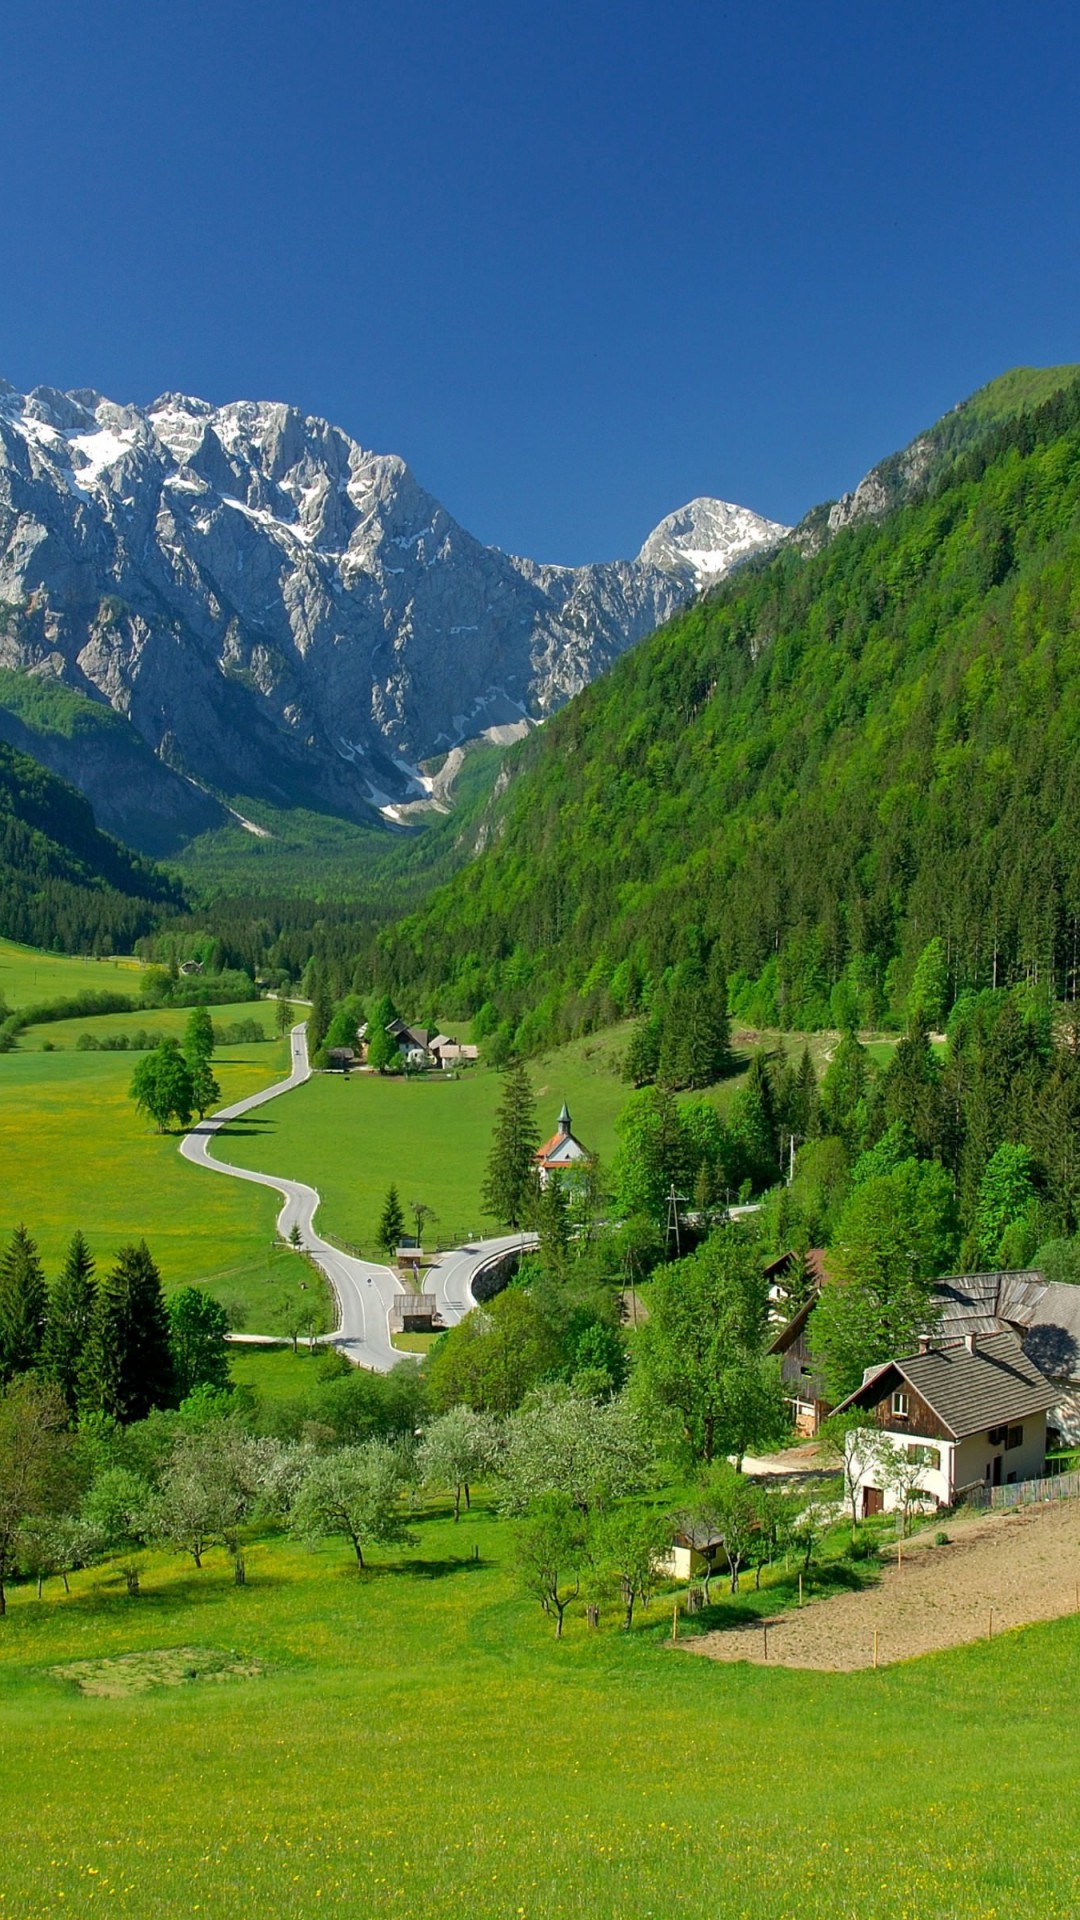 Spring In The Alpine Valley Wallpaper for SONY Xperia Z2